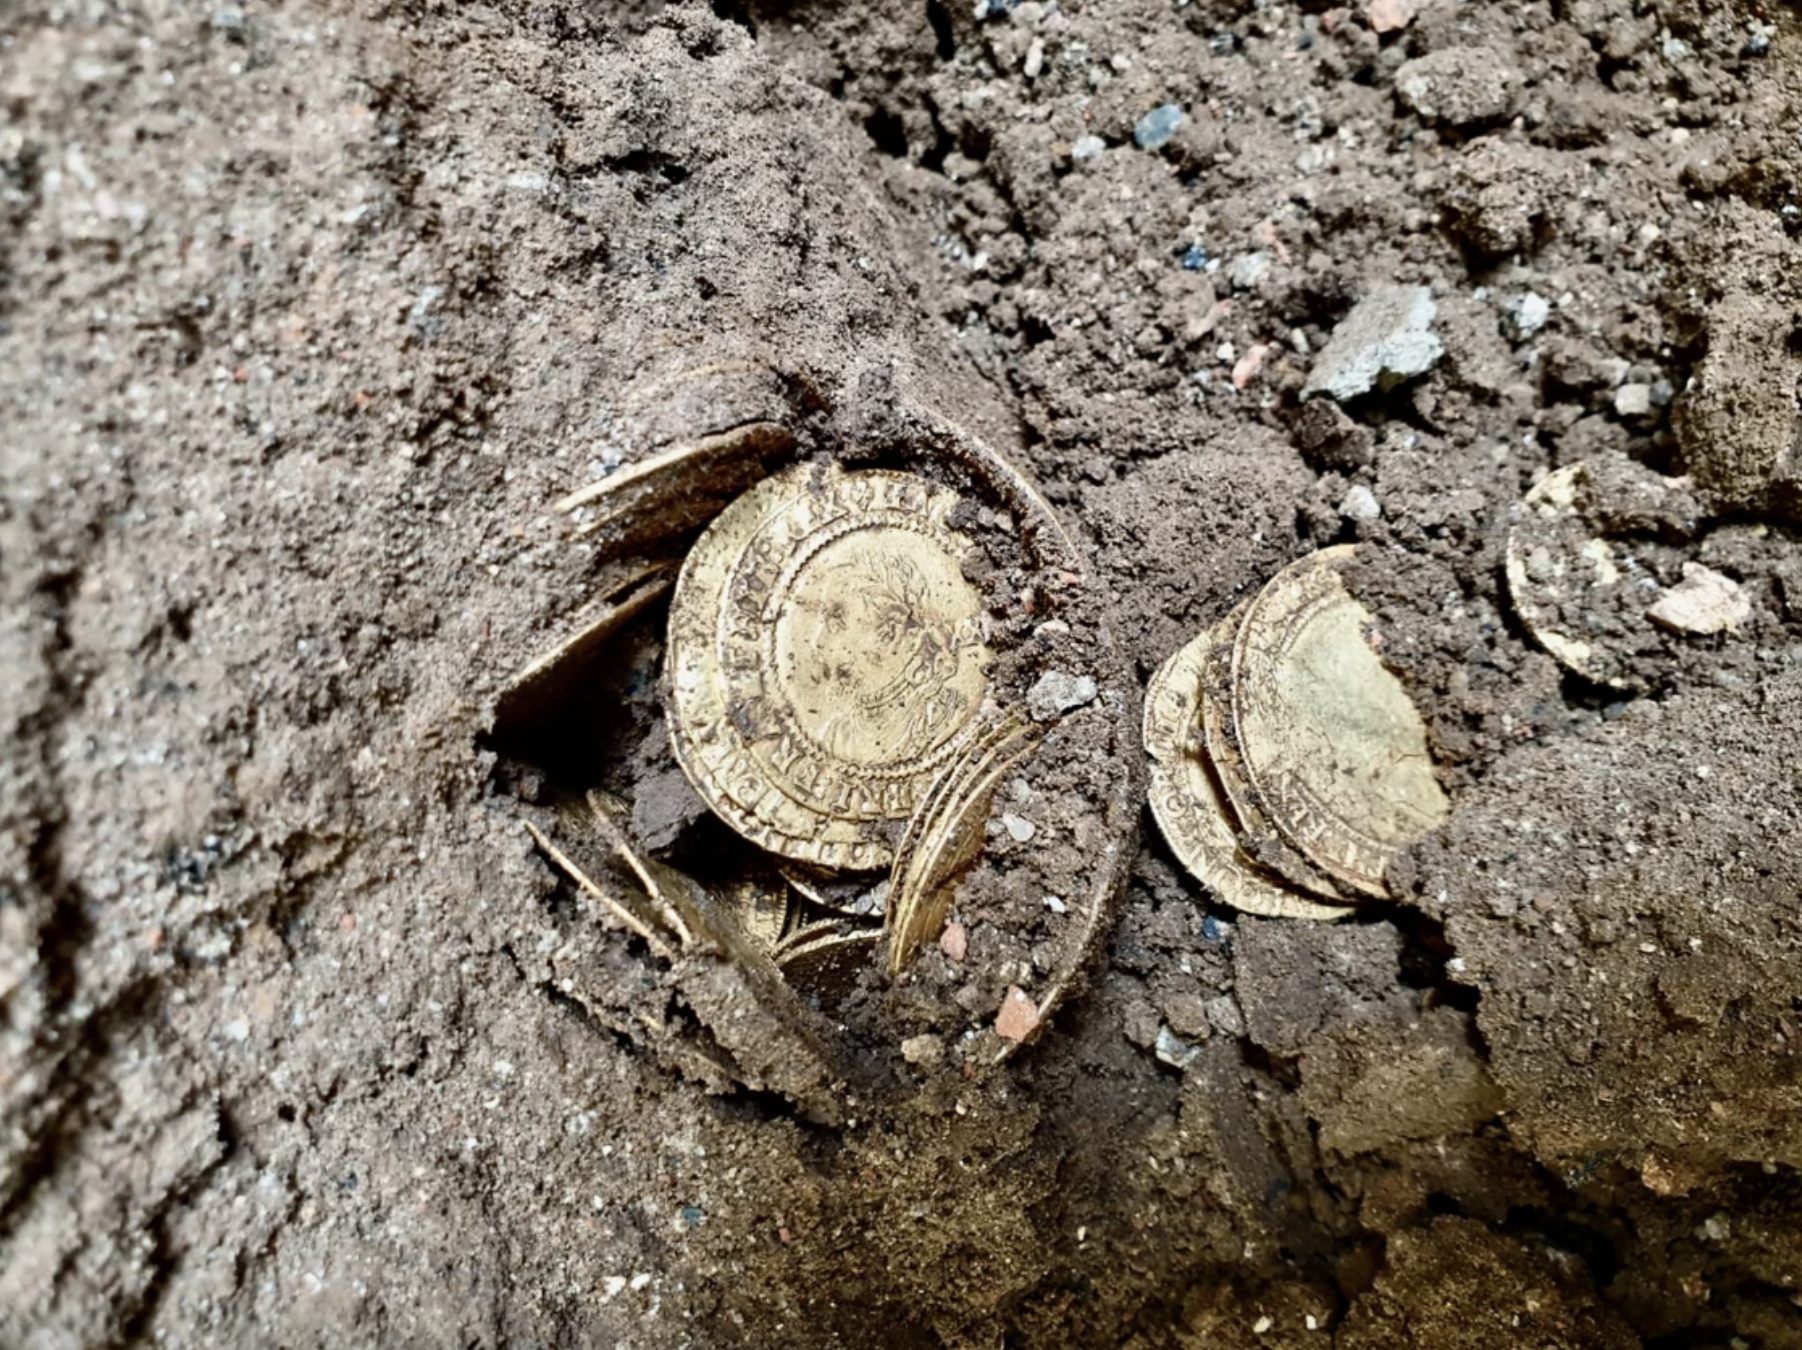 Couple Finds Rare Coins Worth Over $800,000 While Renovating Their
Kitchen Floors